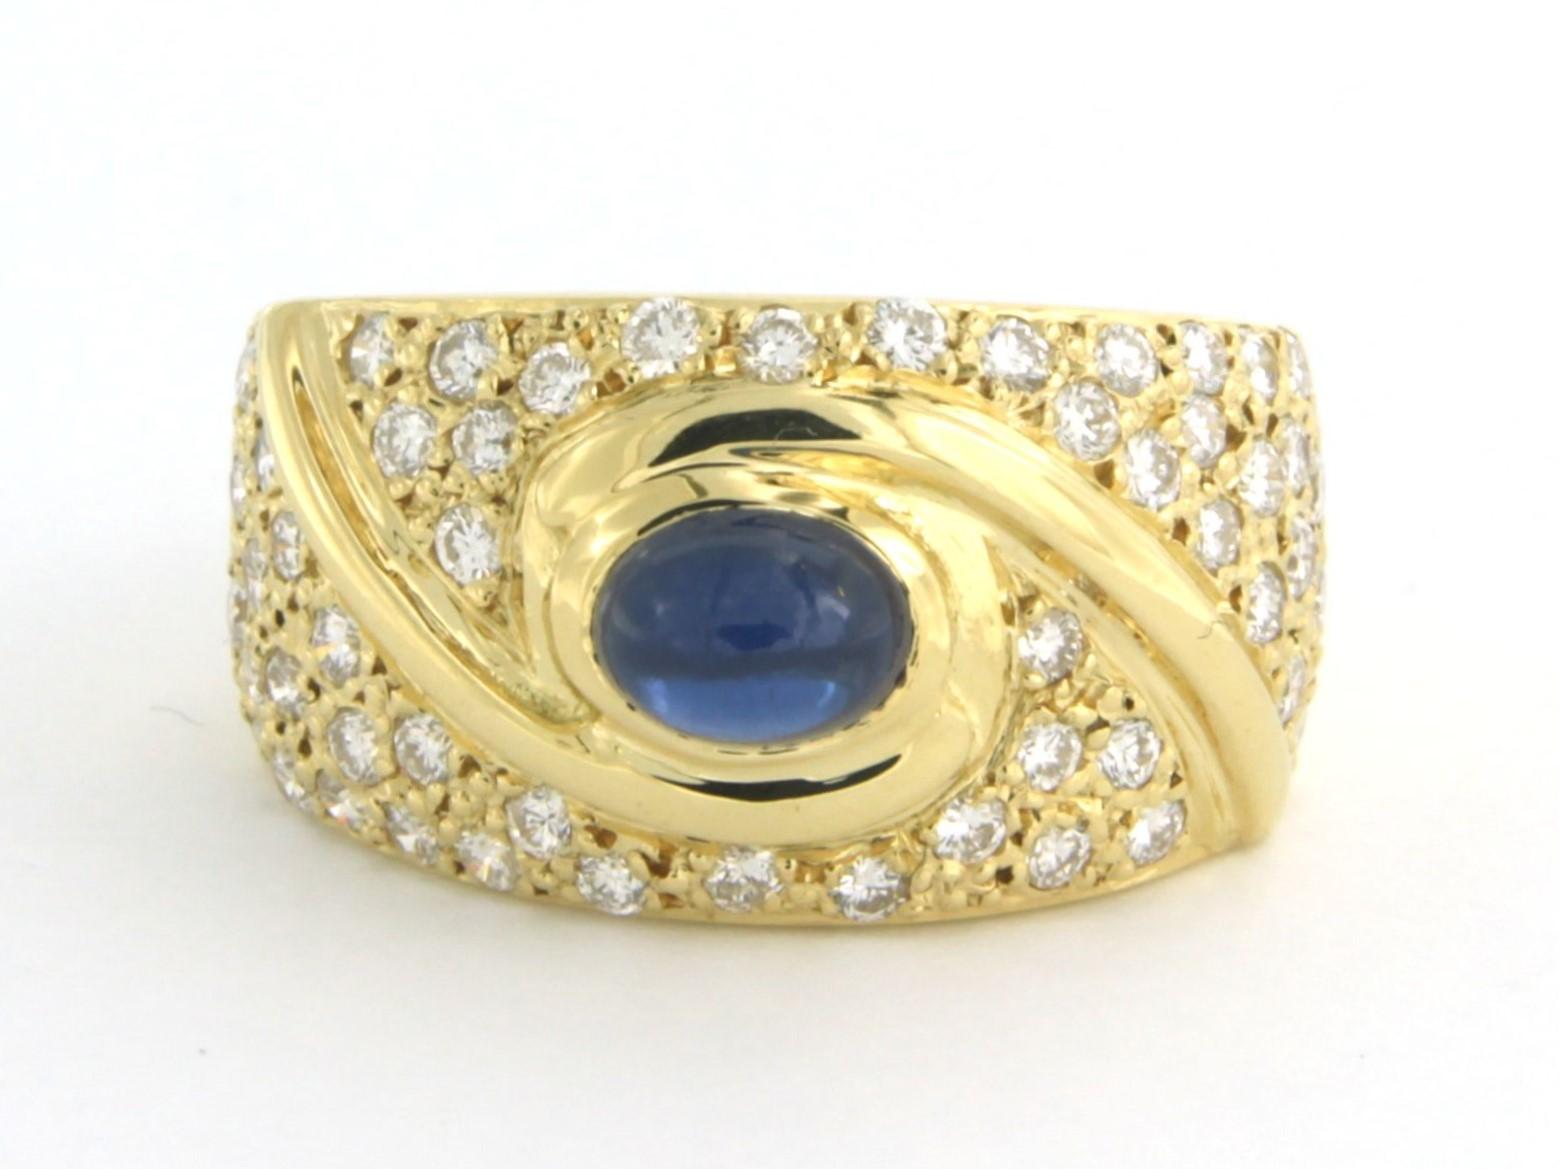 18 kt yellow gold ring set with sapphire and brilliant cut diamonds. 1.00 ct - F/G - VS/SI - ring size U.S. 8 - EU. 18(56)

detailed description:

the front of the ring is 1.2 cm wide by 6.4 mm high

ring size U.S. 8 - EU. 18(56). The ring can be